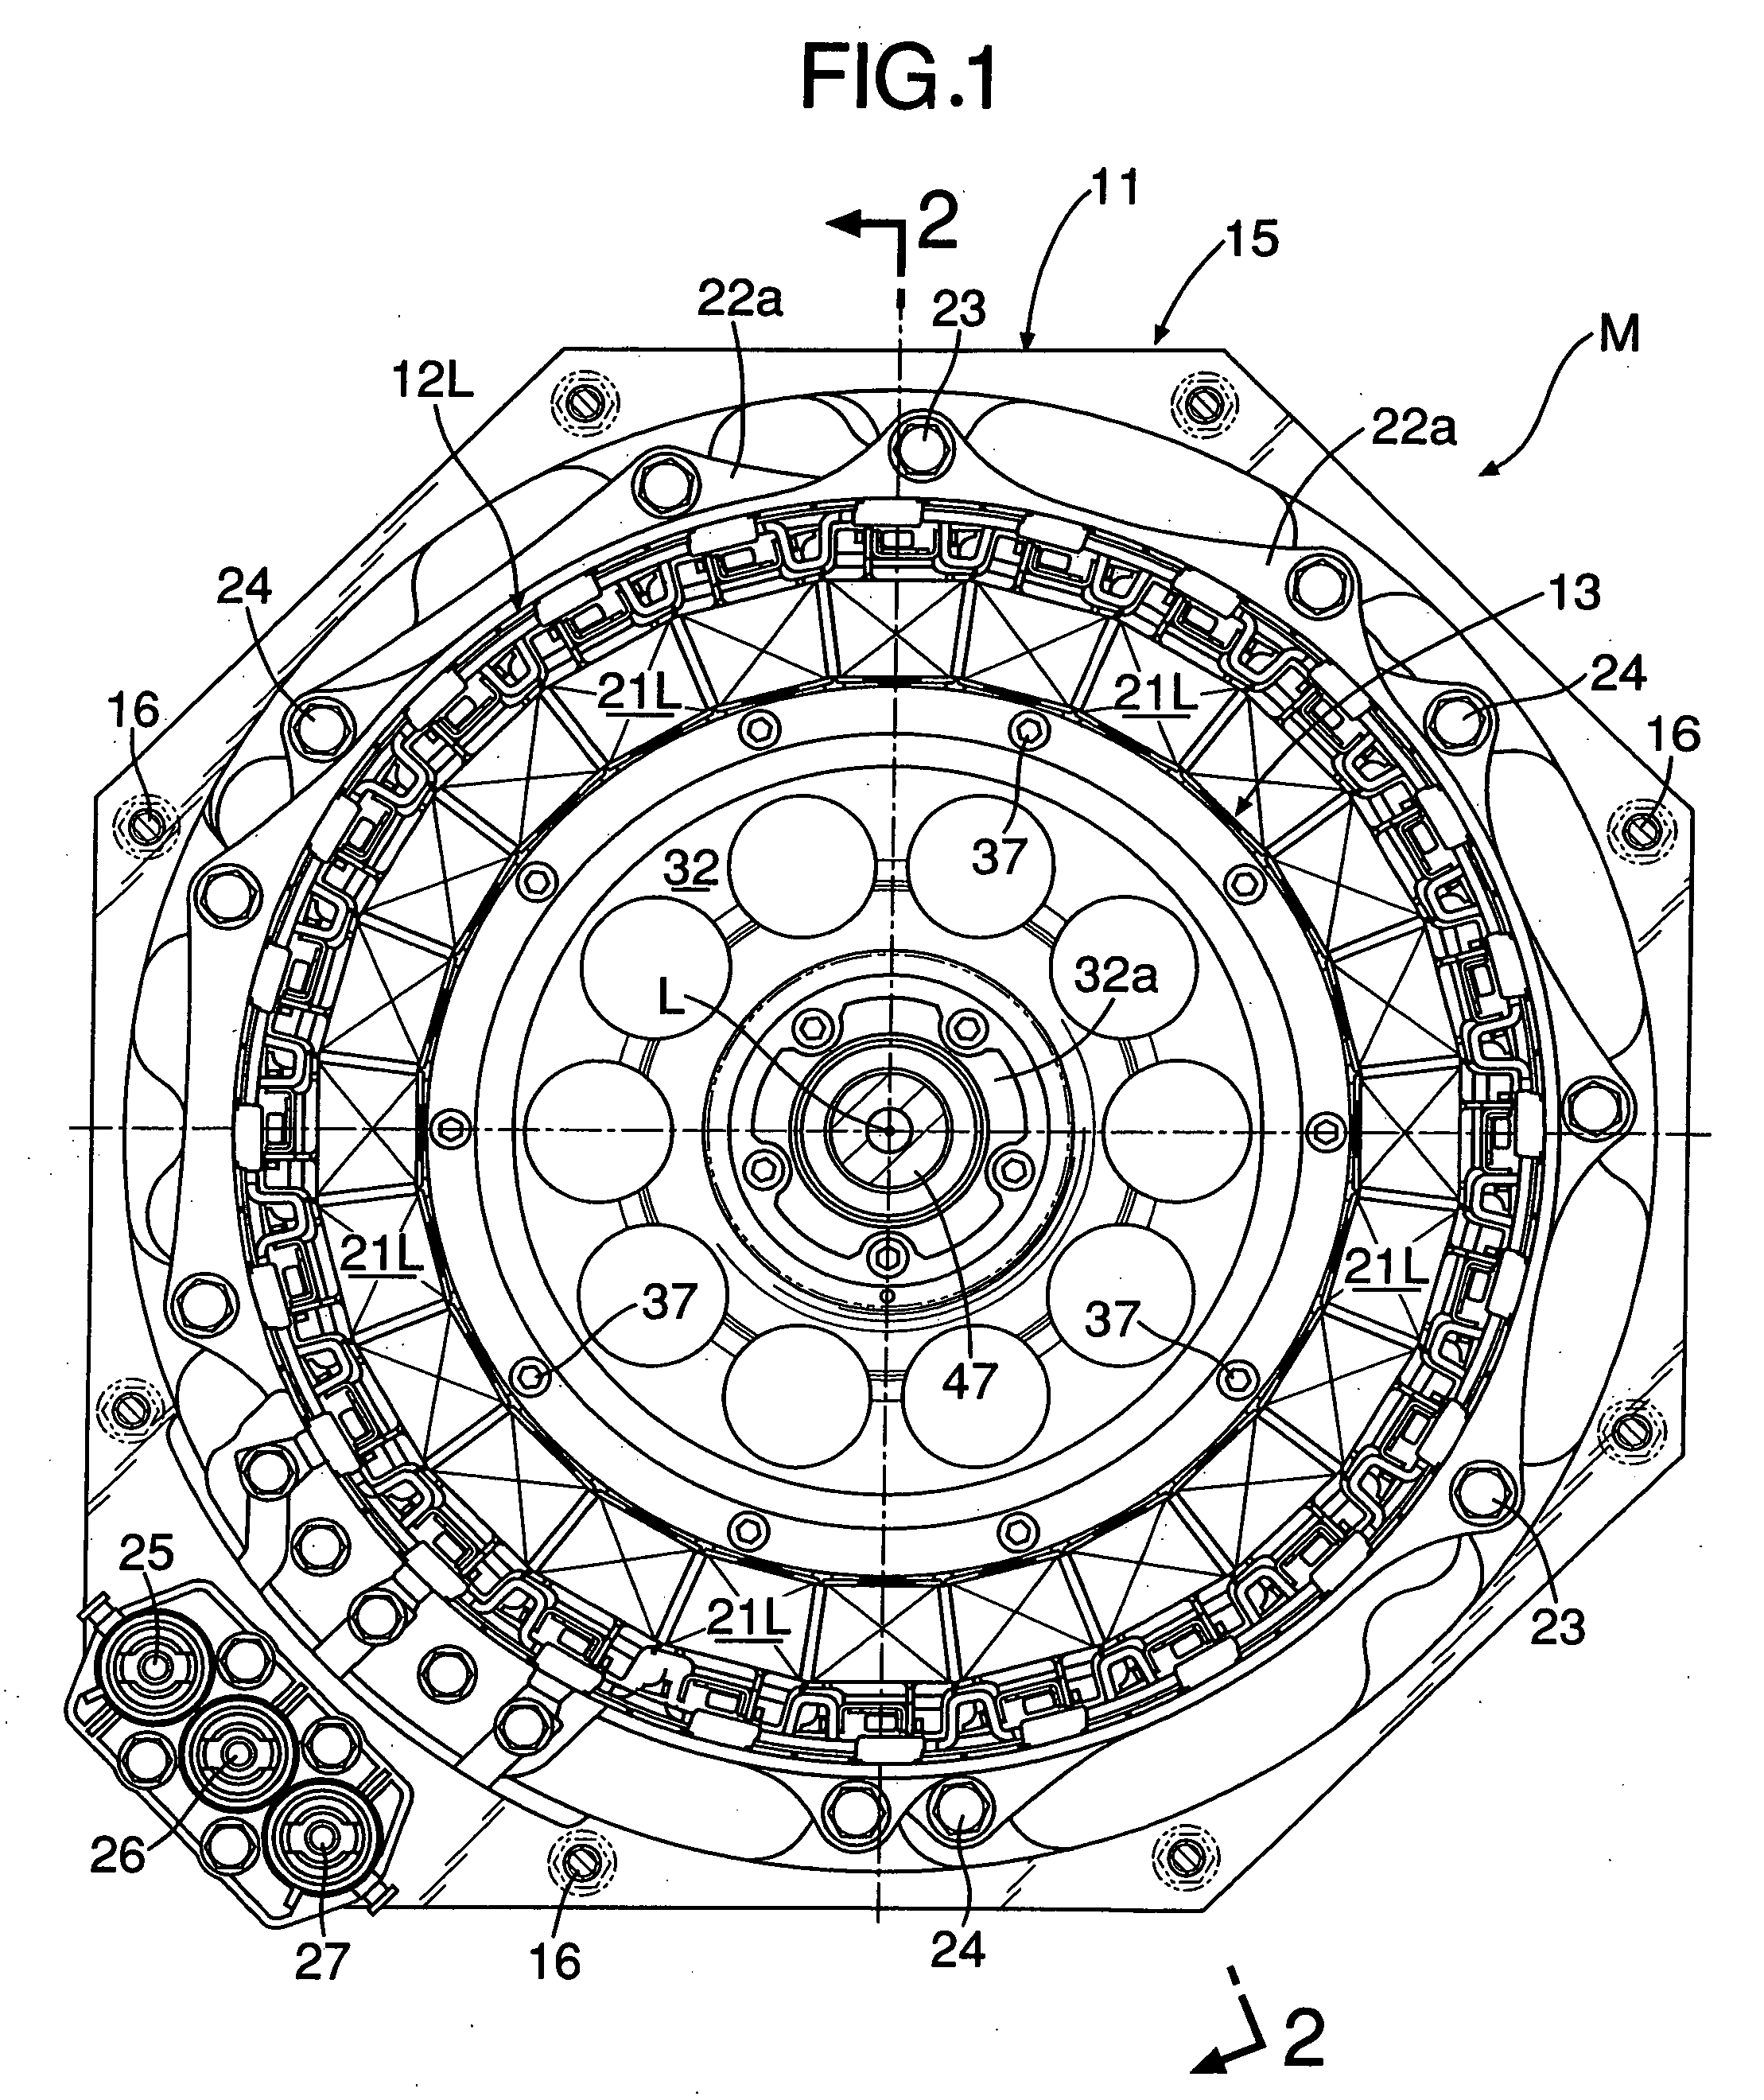 Rotor for rotating electrical machine